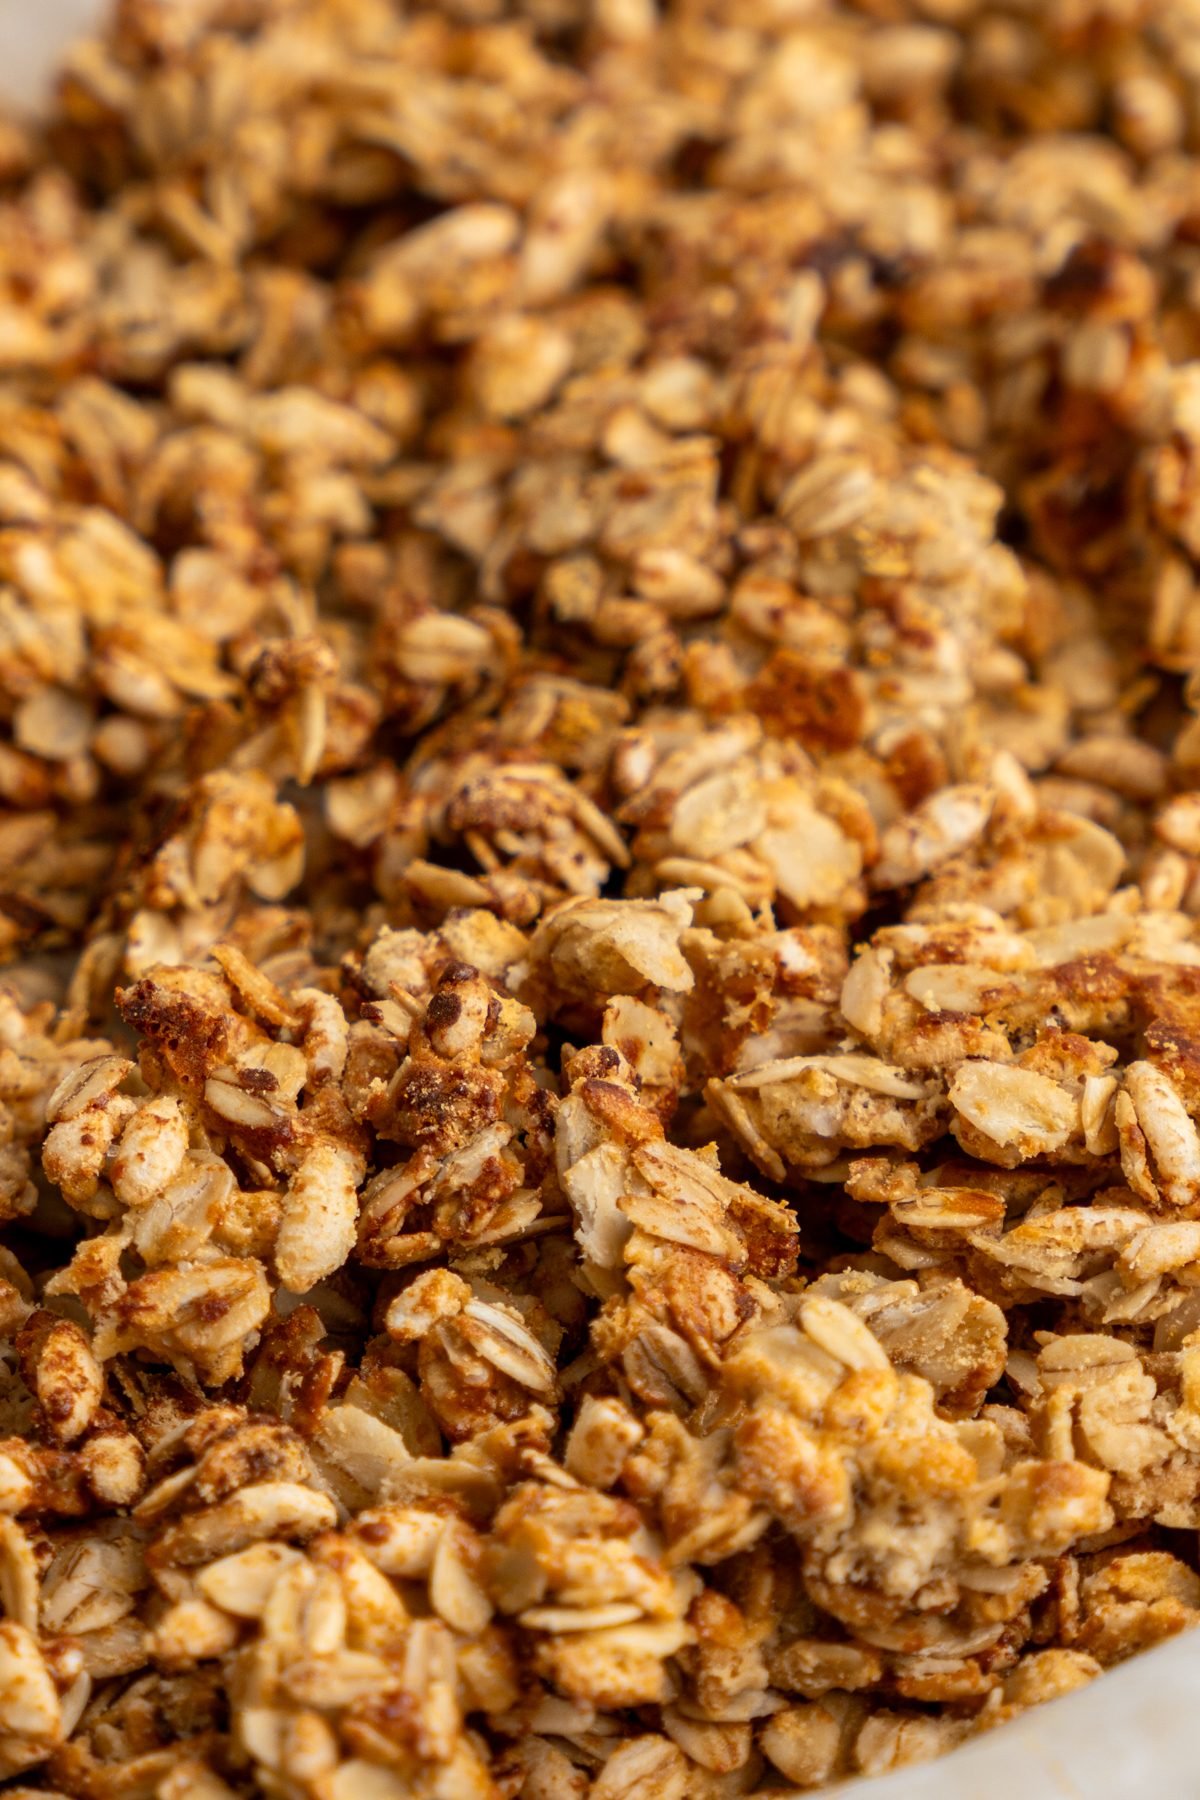 Vanilla granola with oats, puffed rice, and protein powder.